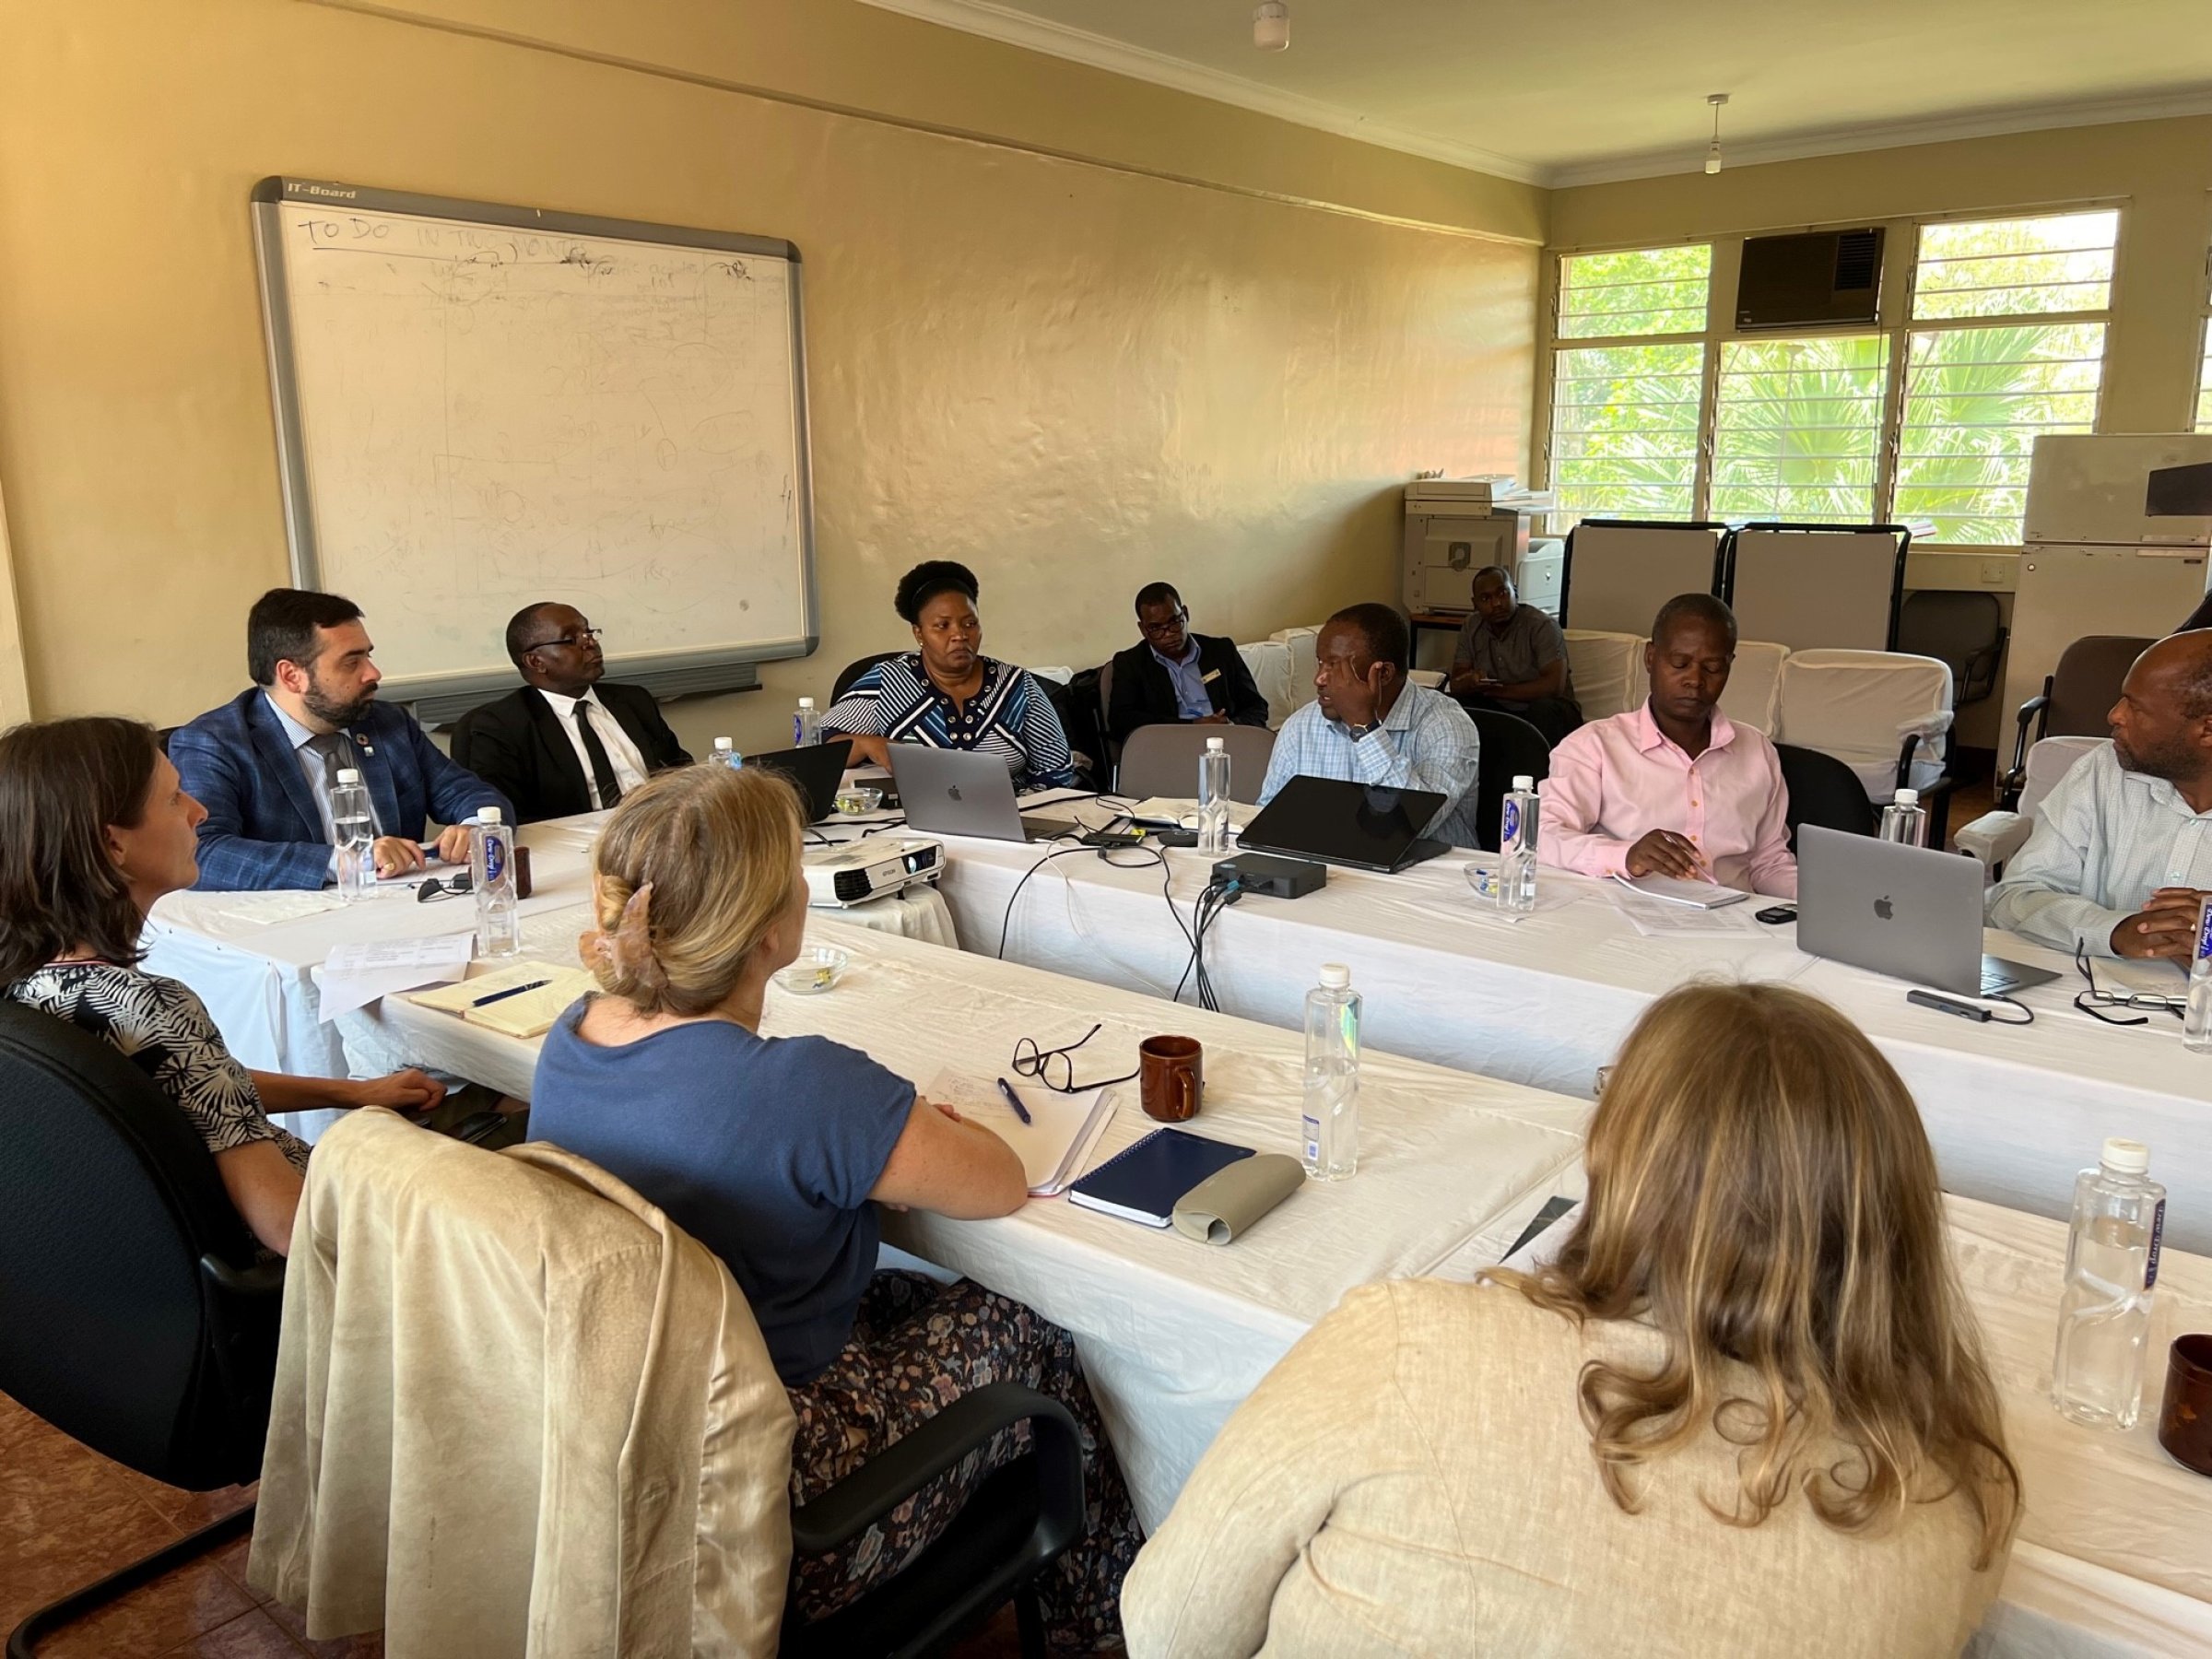 The NVI has already established cooperation plans with various institutions in Malawi and Ethiopia, and now possible future joint initiatives with potential partners in Tanzania are being explored. Photo: Bryndis Holm